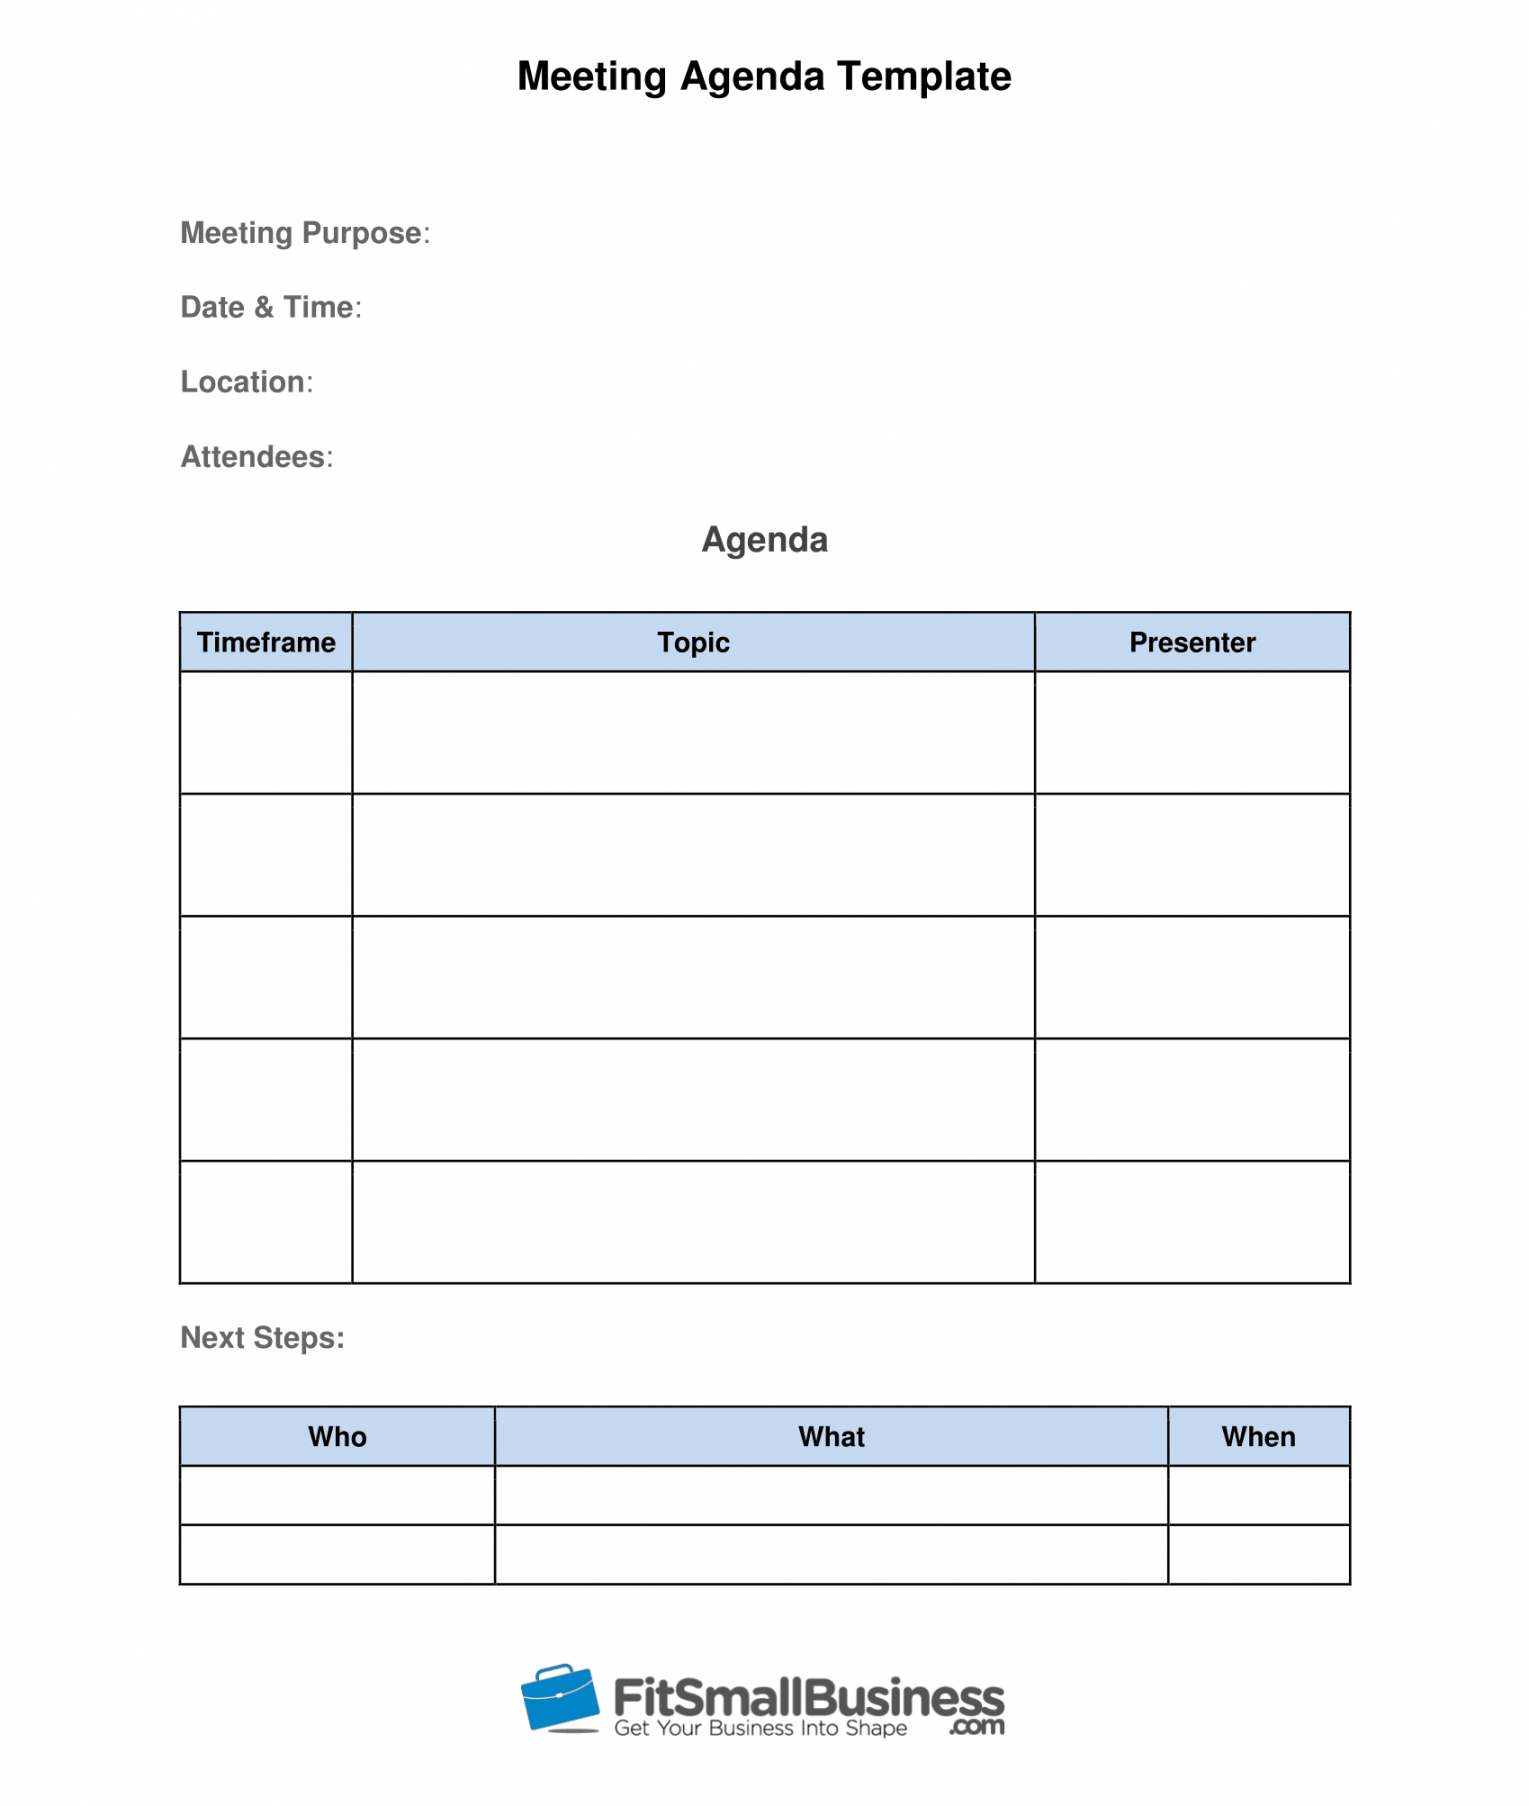 editable how to run effective meetings in 10 steps [ free template] multi day meeting agenda template word